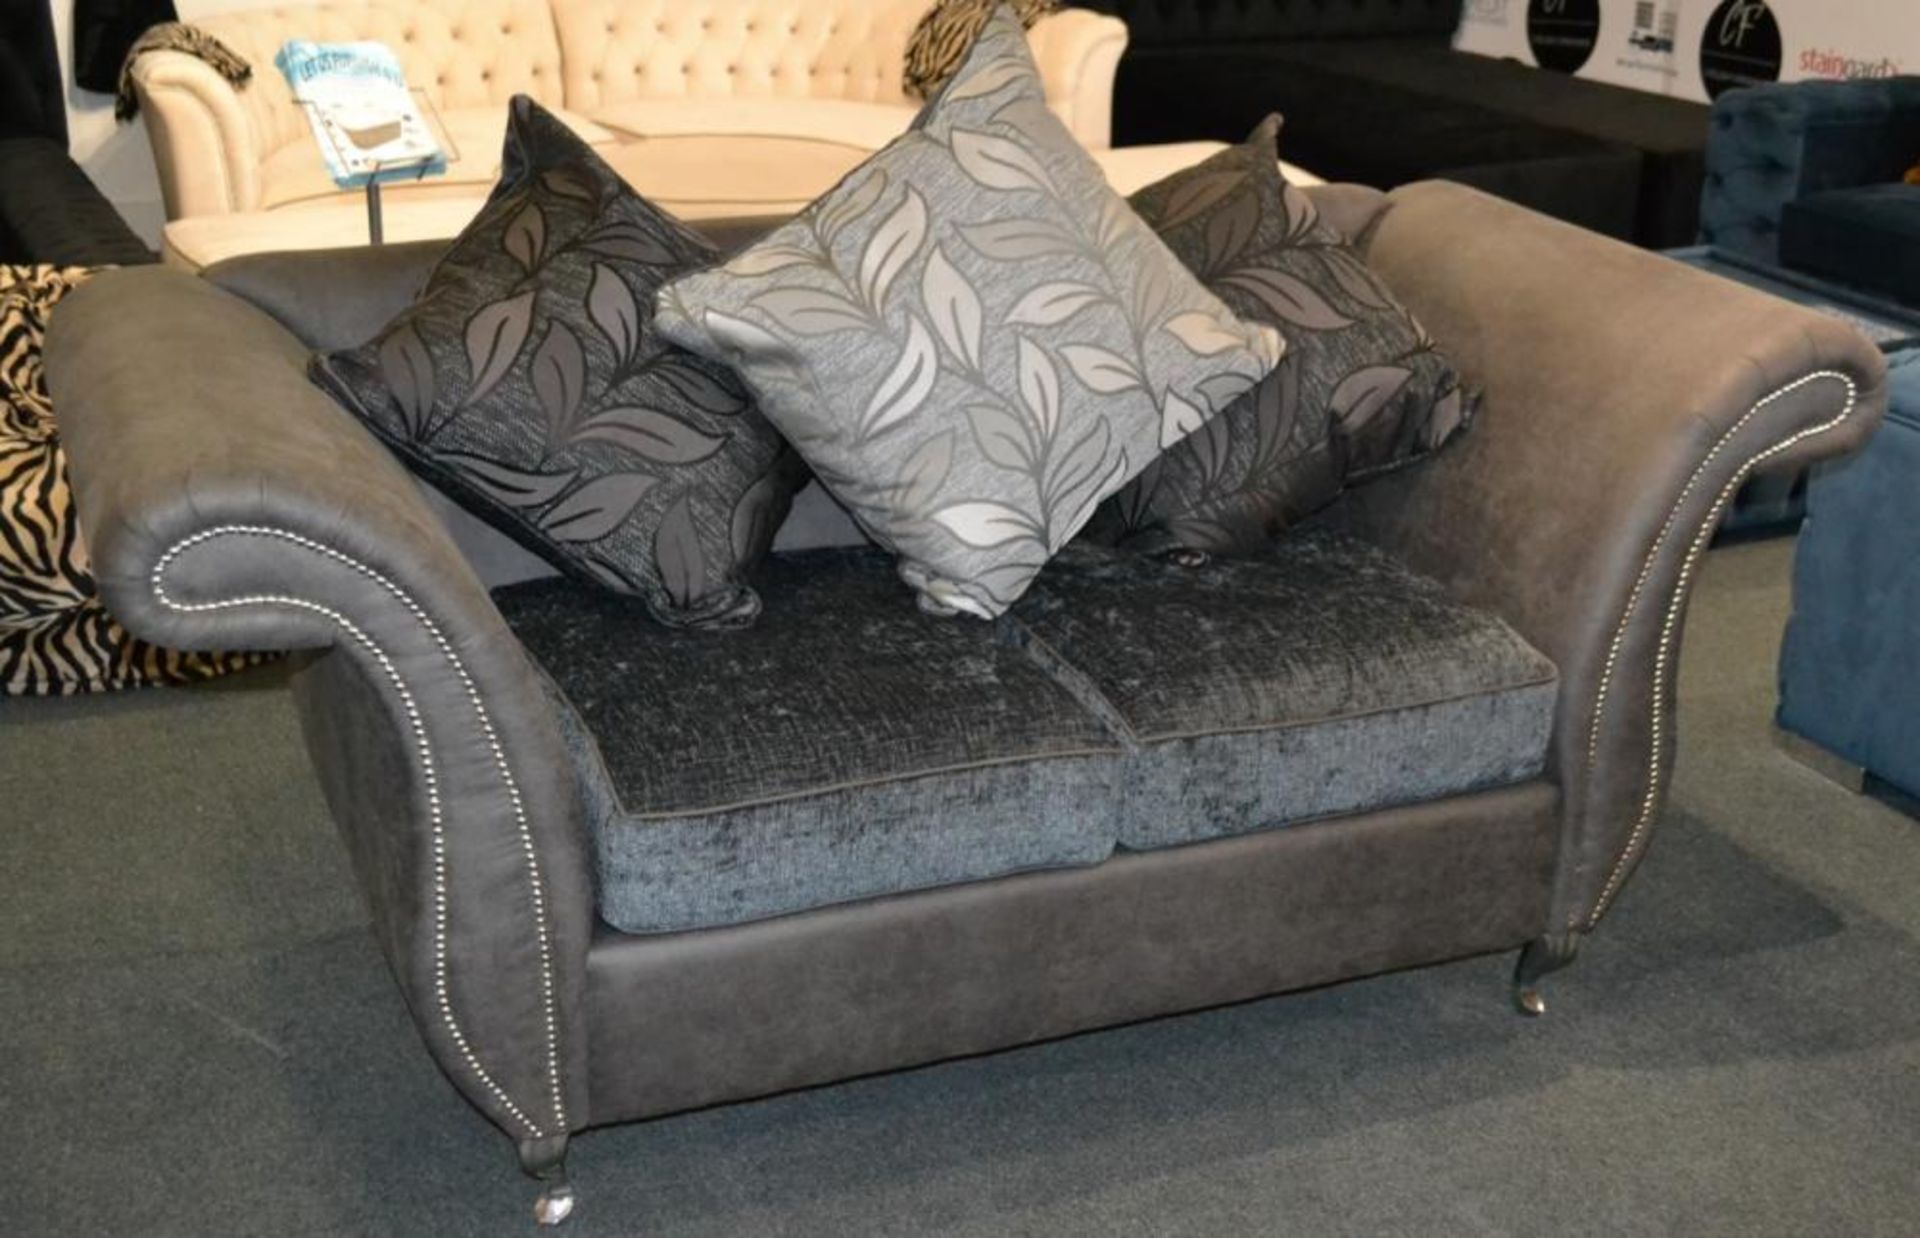 1 x Stylish Bespoke Double Seater Sofa. This sofa is covered in a soft dark grey leatherette with th